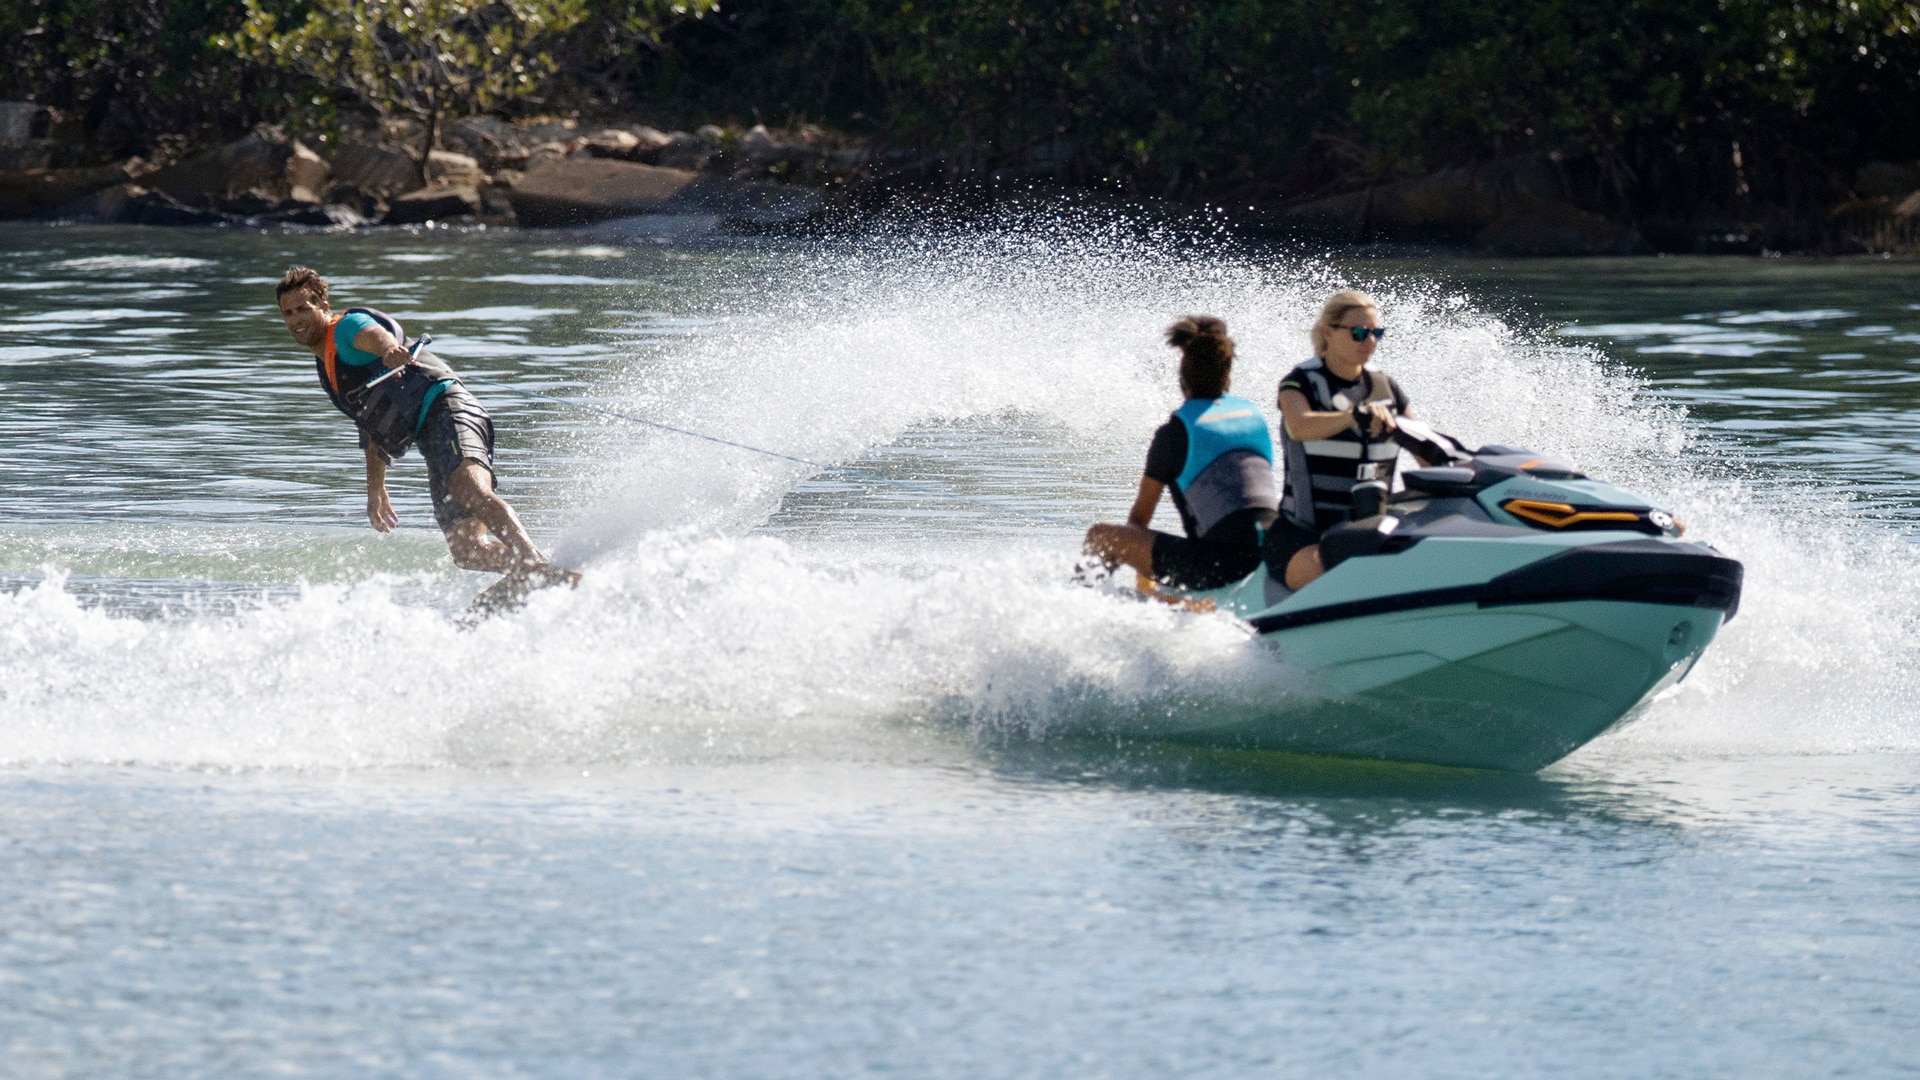 Woman riding a Sea-Doo Wake Pro with a passenger and pulling a wakeboarder